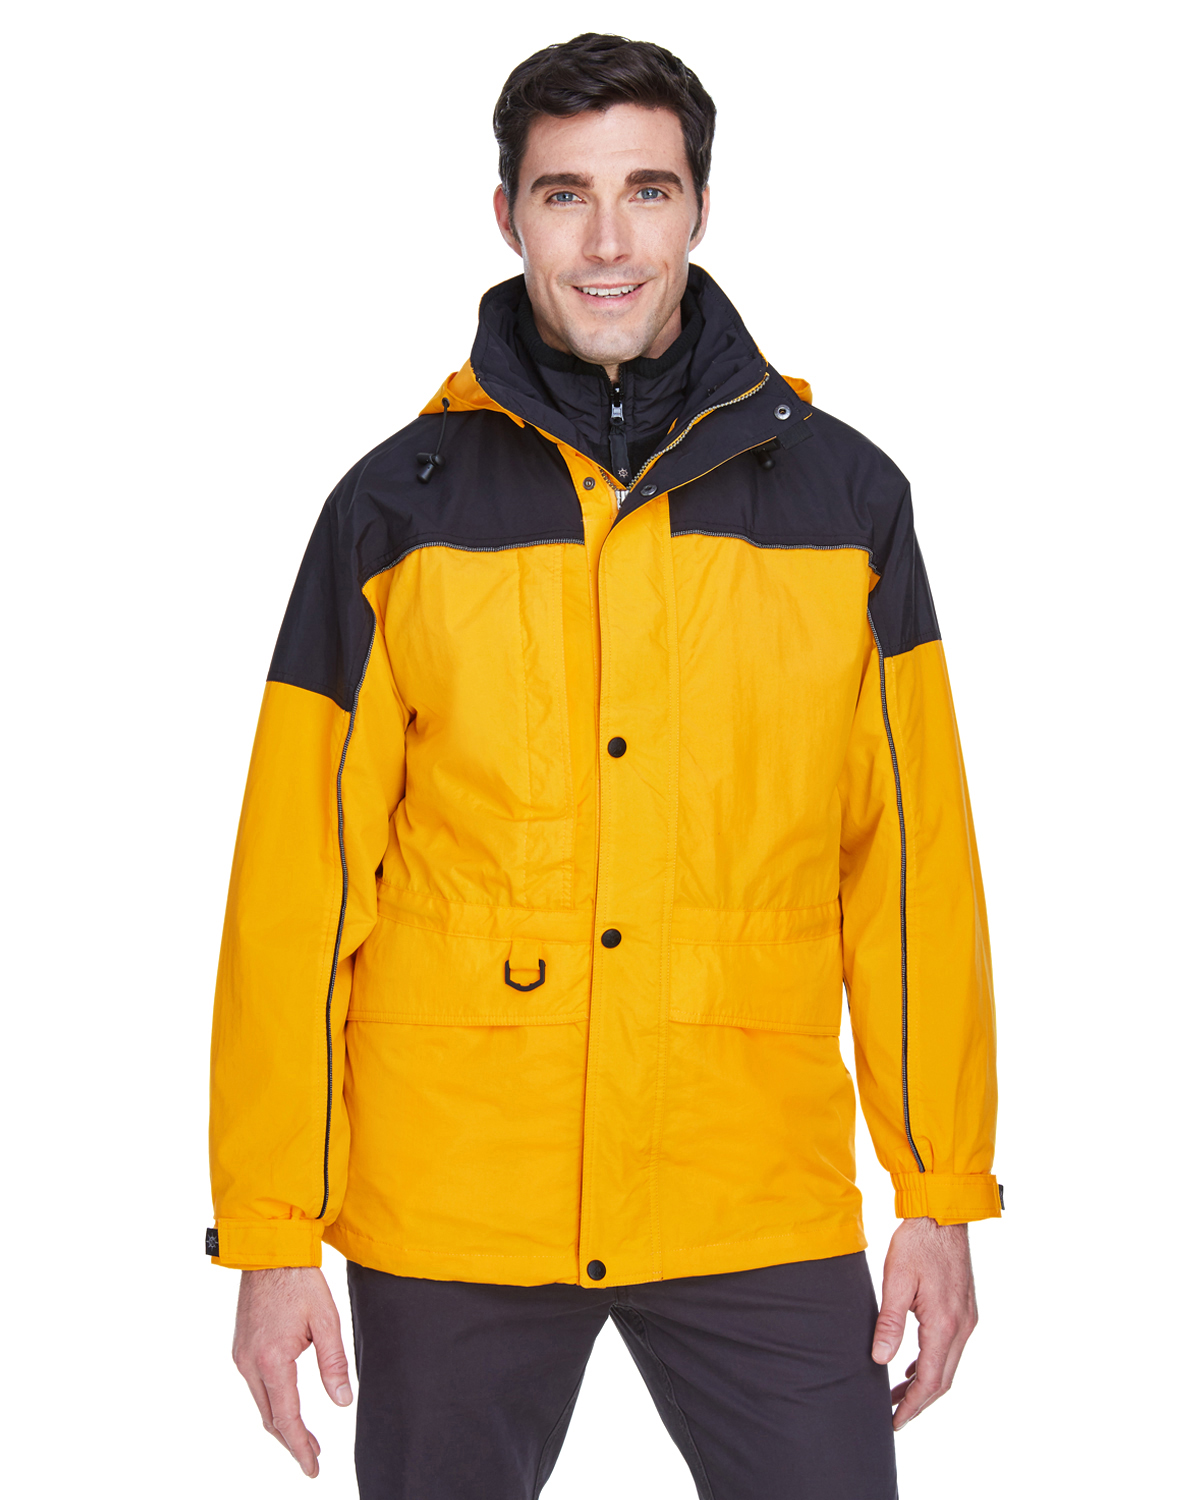 Big Mens 3-in-1 Two-Tone Parka 